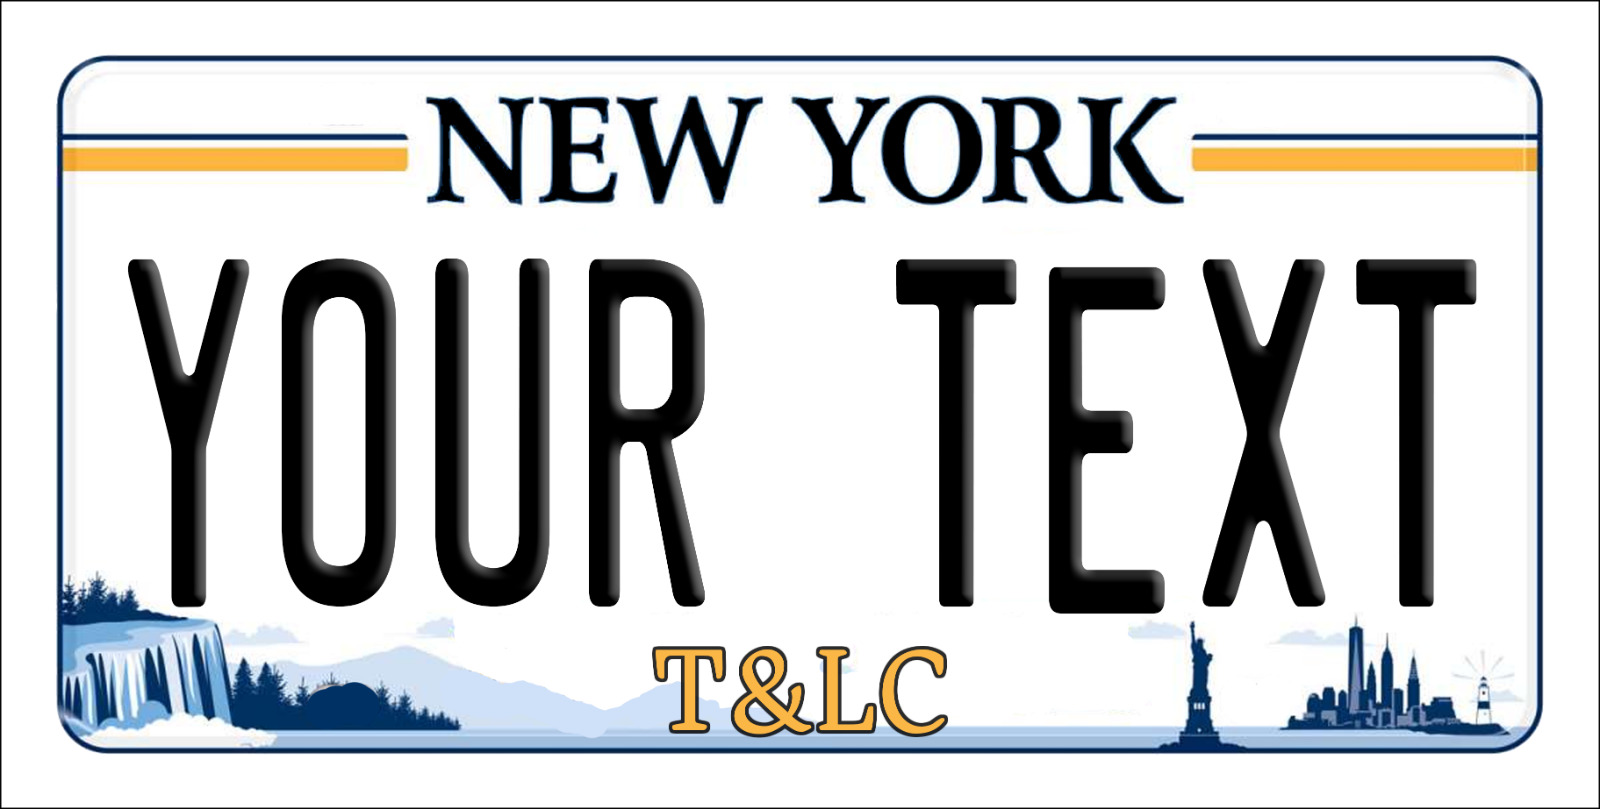 CUSTOMIZE THIS NEW YORK LICENSE PLATE - ANY TEXT YOU WANT, novelty T & LC plates